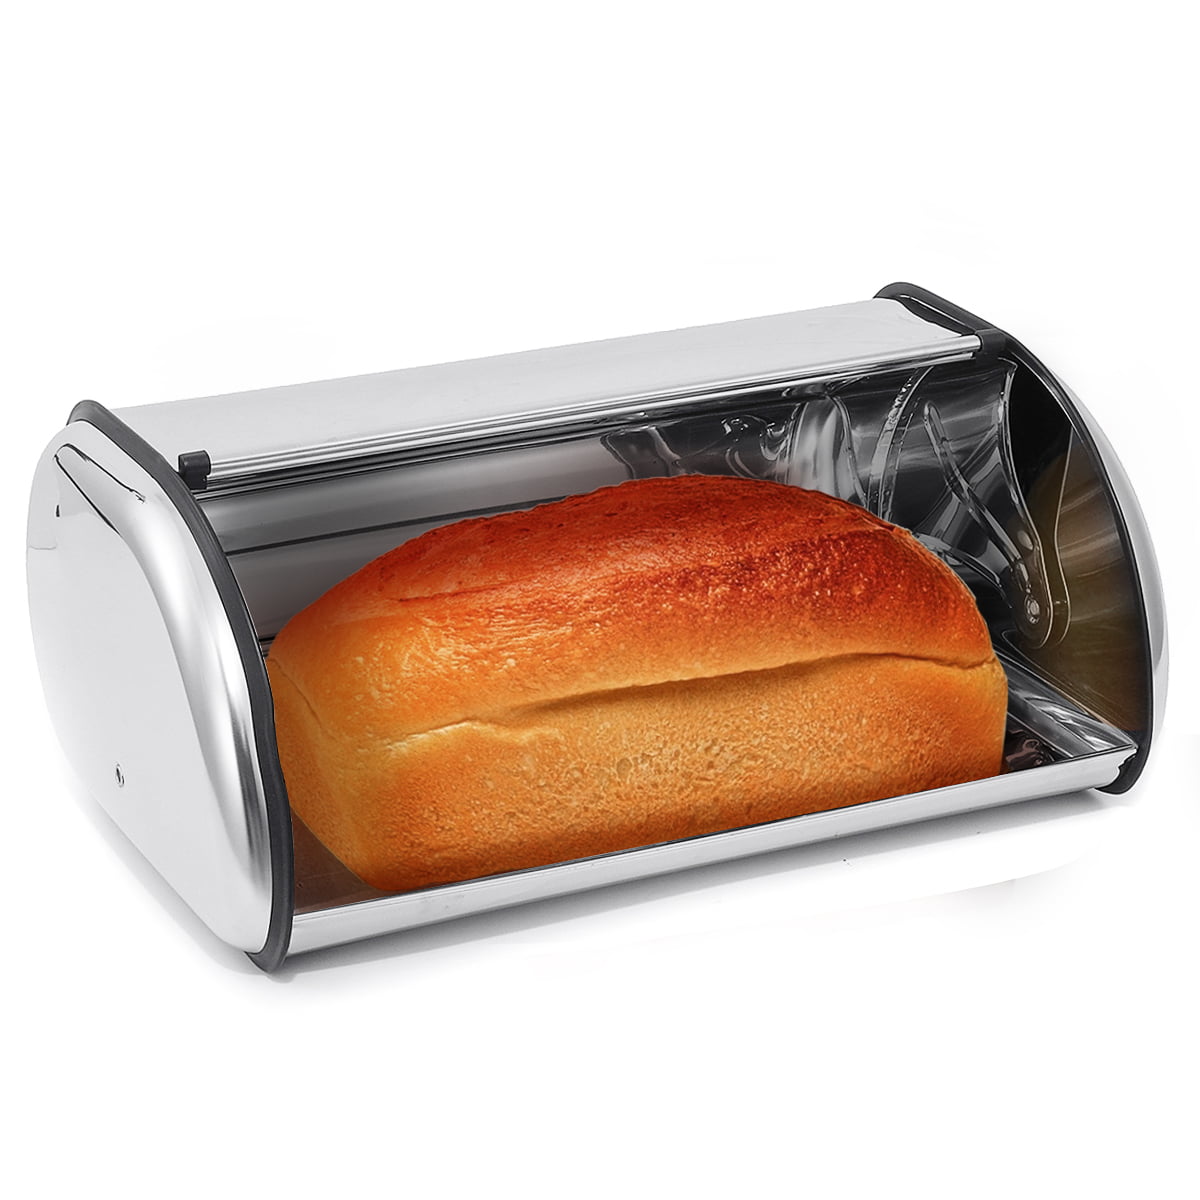 Bread Bin Metal Kitchen Cake Roll Top Lid Loaf Storage Food Holder Container Box 